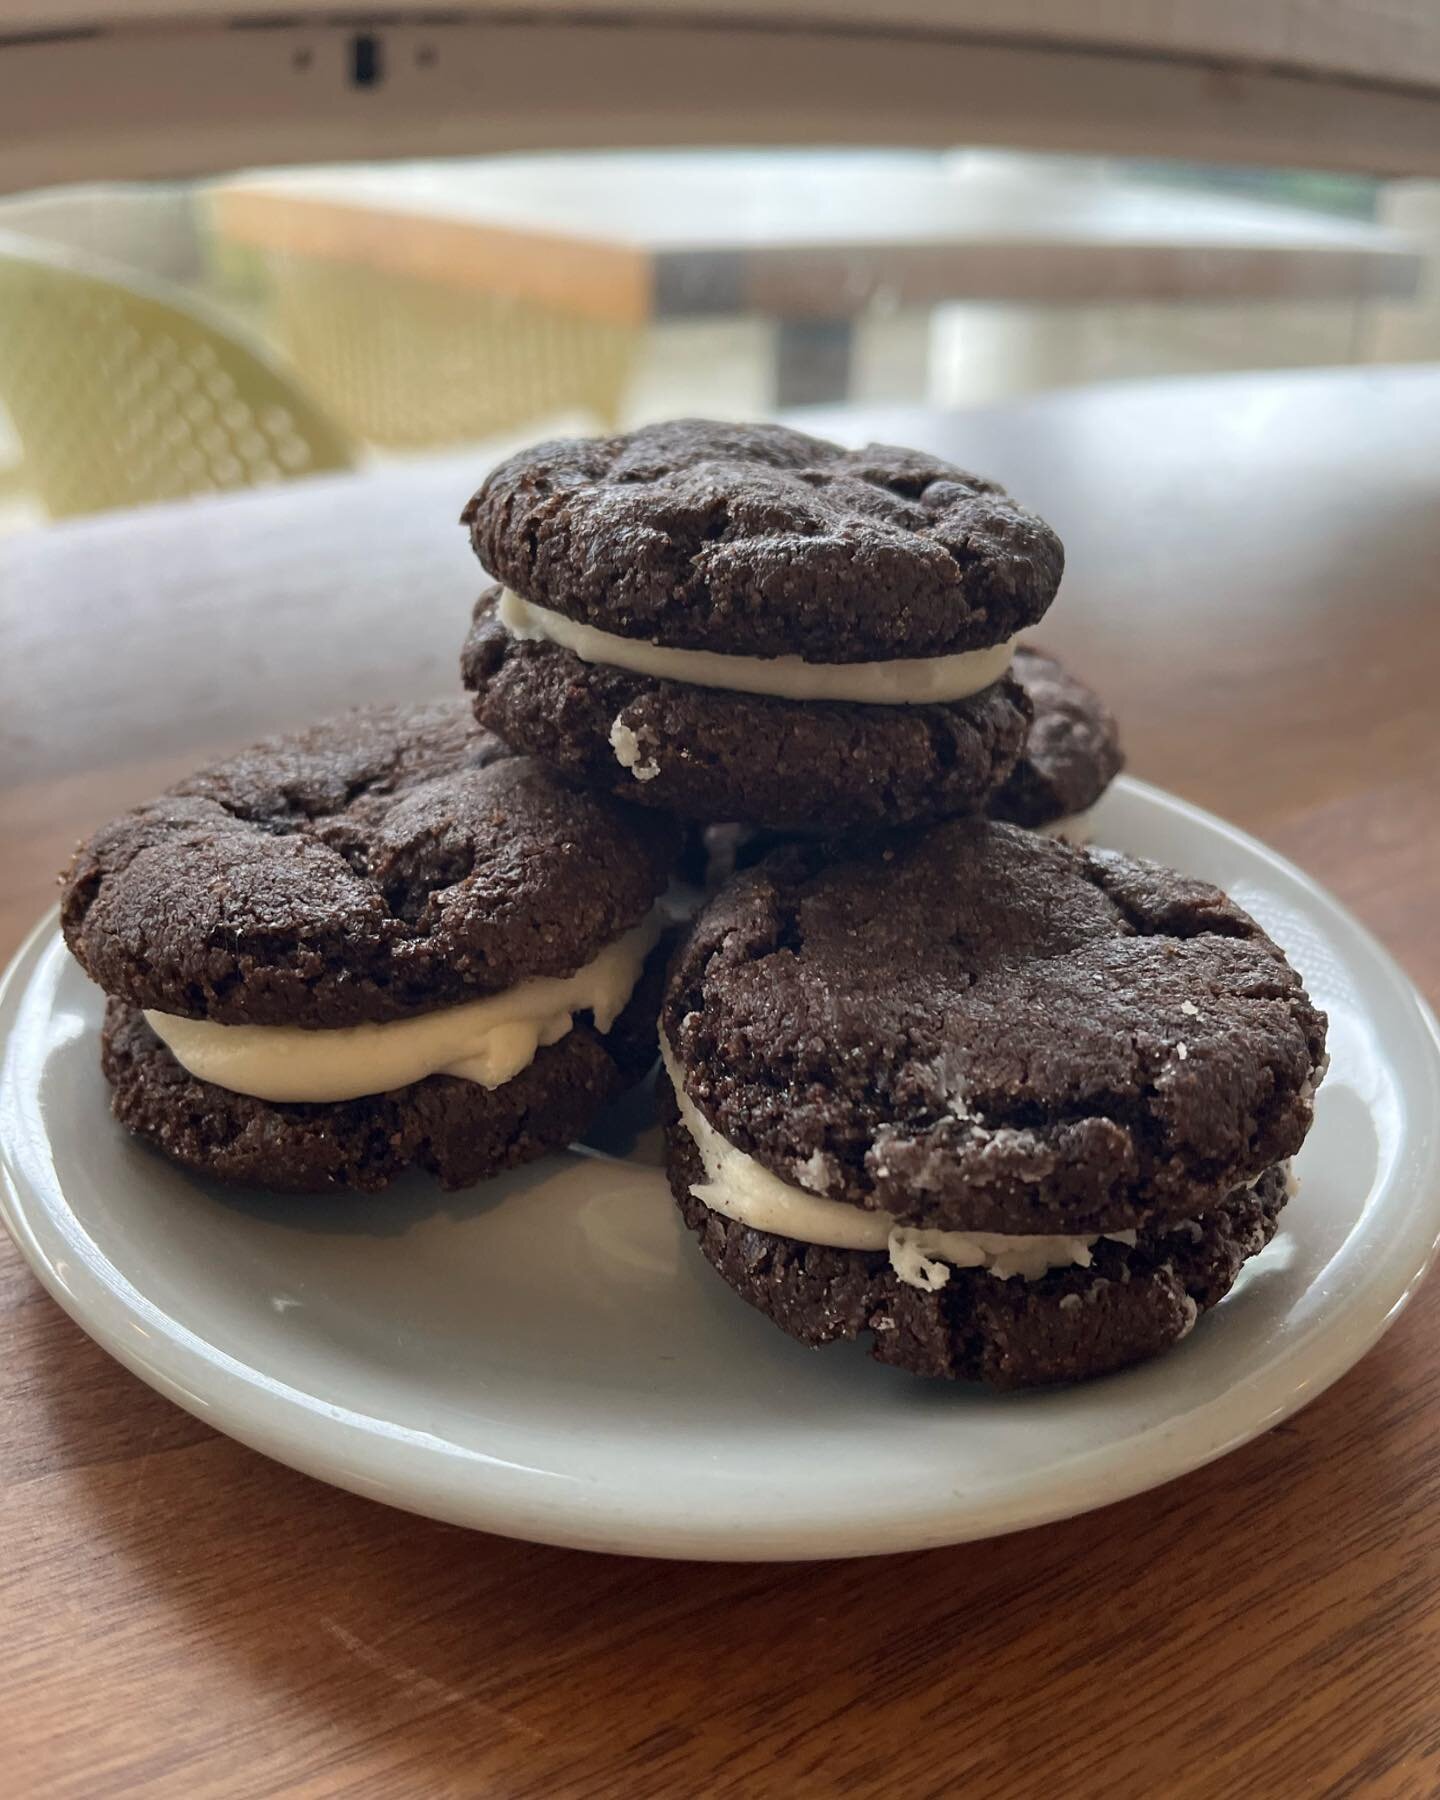 Companion &ldquo;oreo&rdquo; Sandwich Cookies. Yum&hellip; best Valentines gift for yourself or a special Valentine!